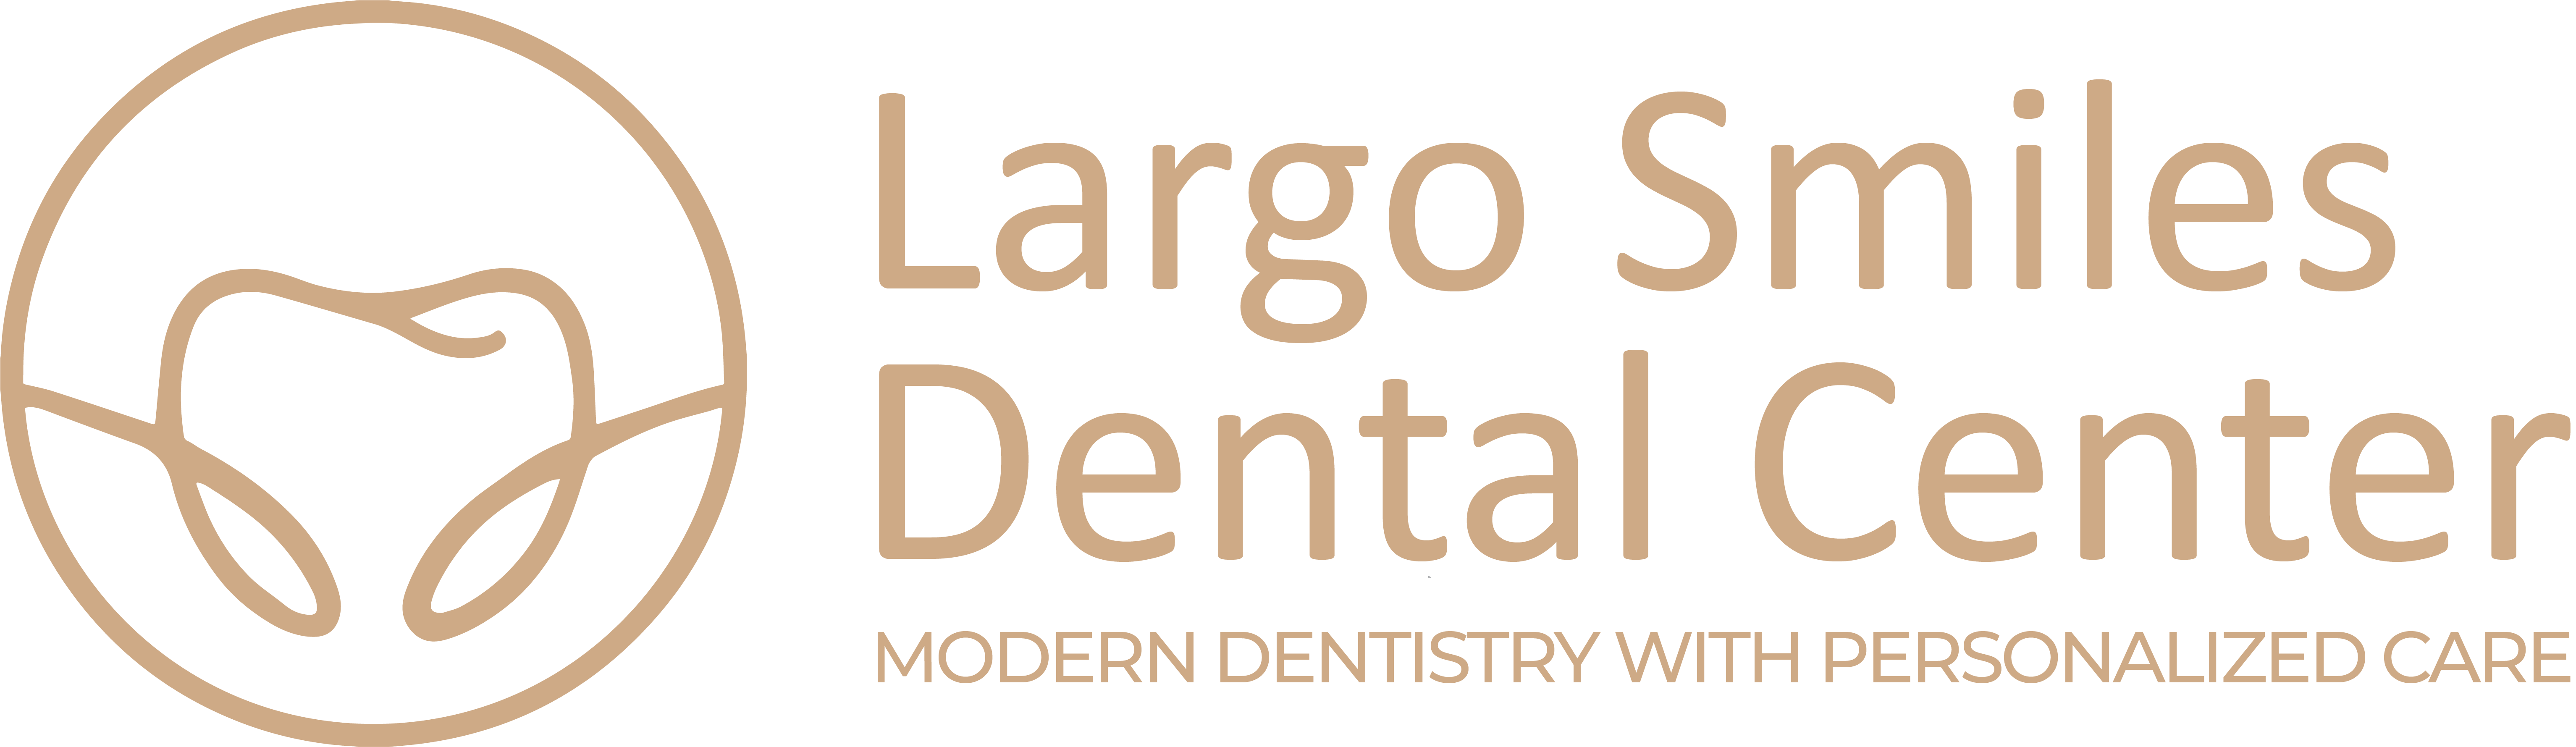 Modern Dentistry with Personal Care